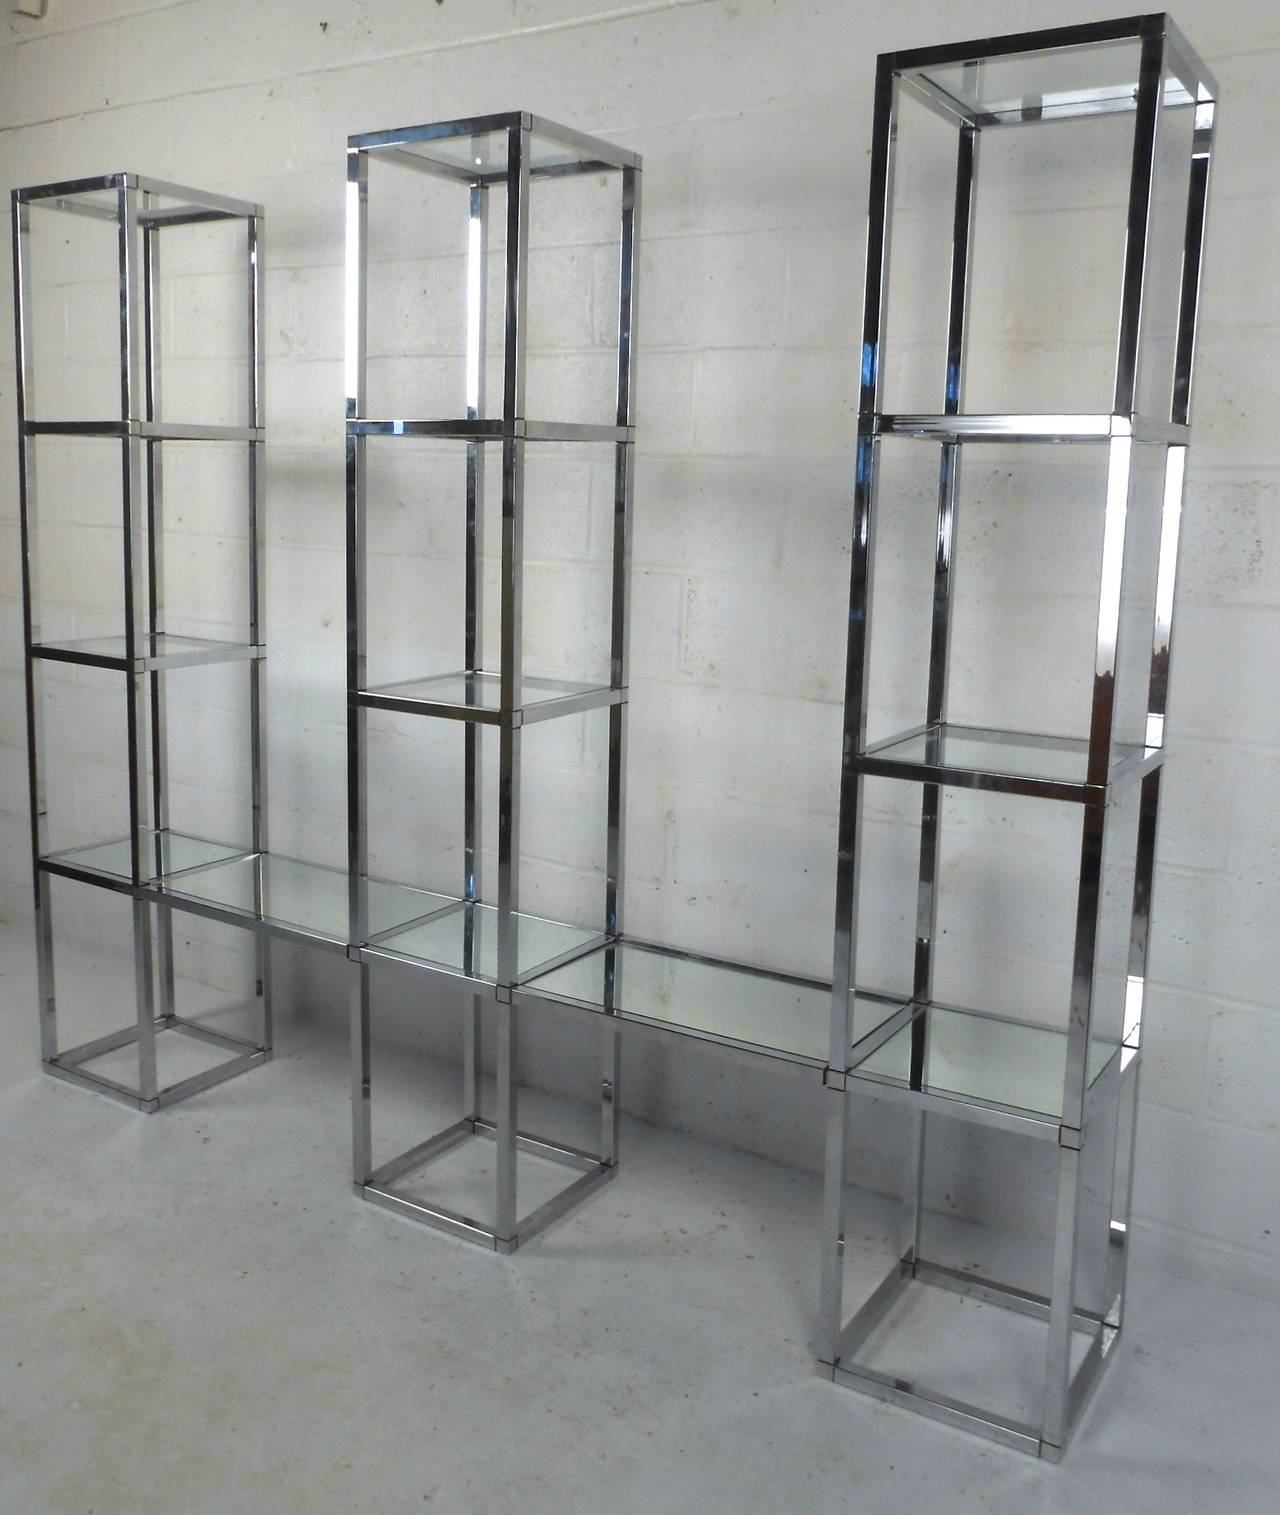 This Baughman style étagère is made of three heavy chrome towers connected by mirrored floating shelves. Wonderful wall display for home or shop, please confirm item location (NY or NJ).